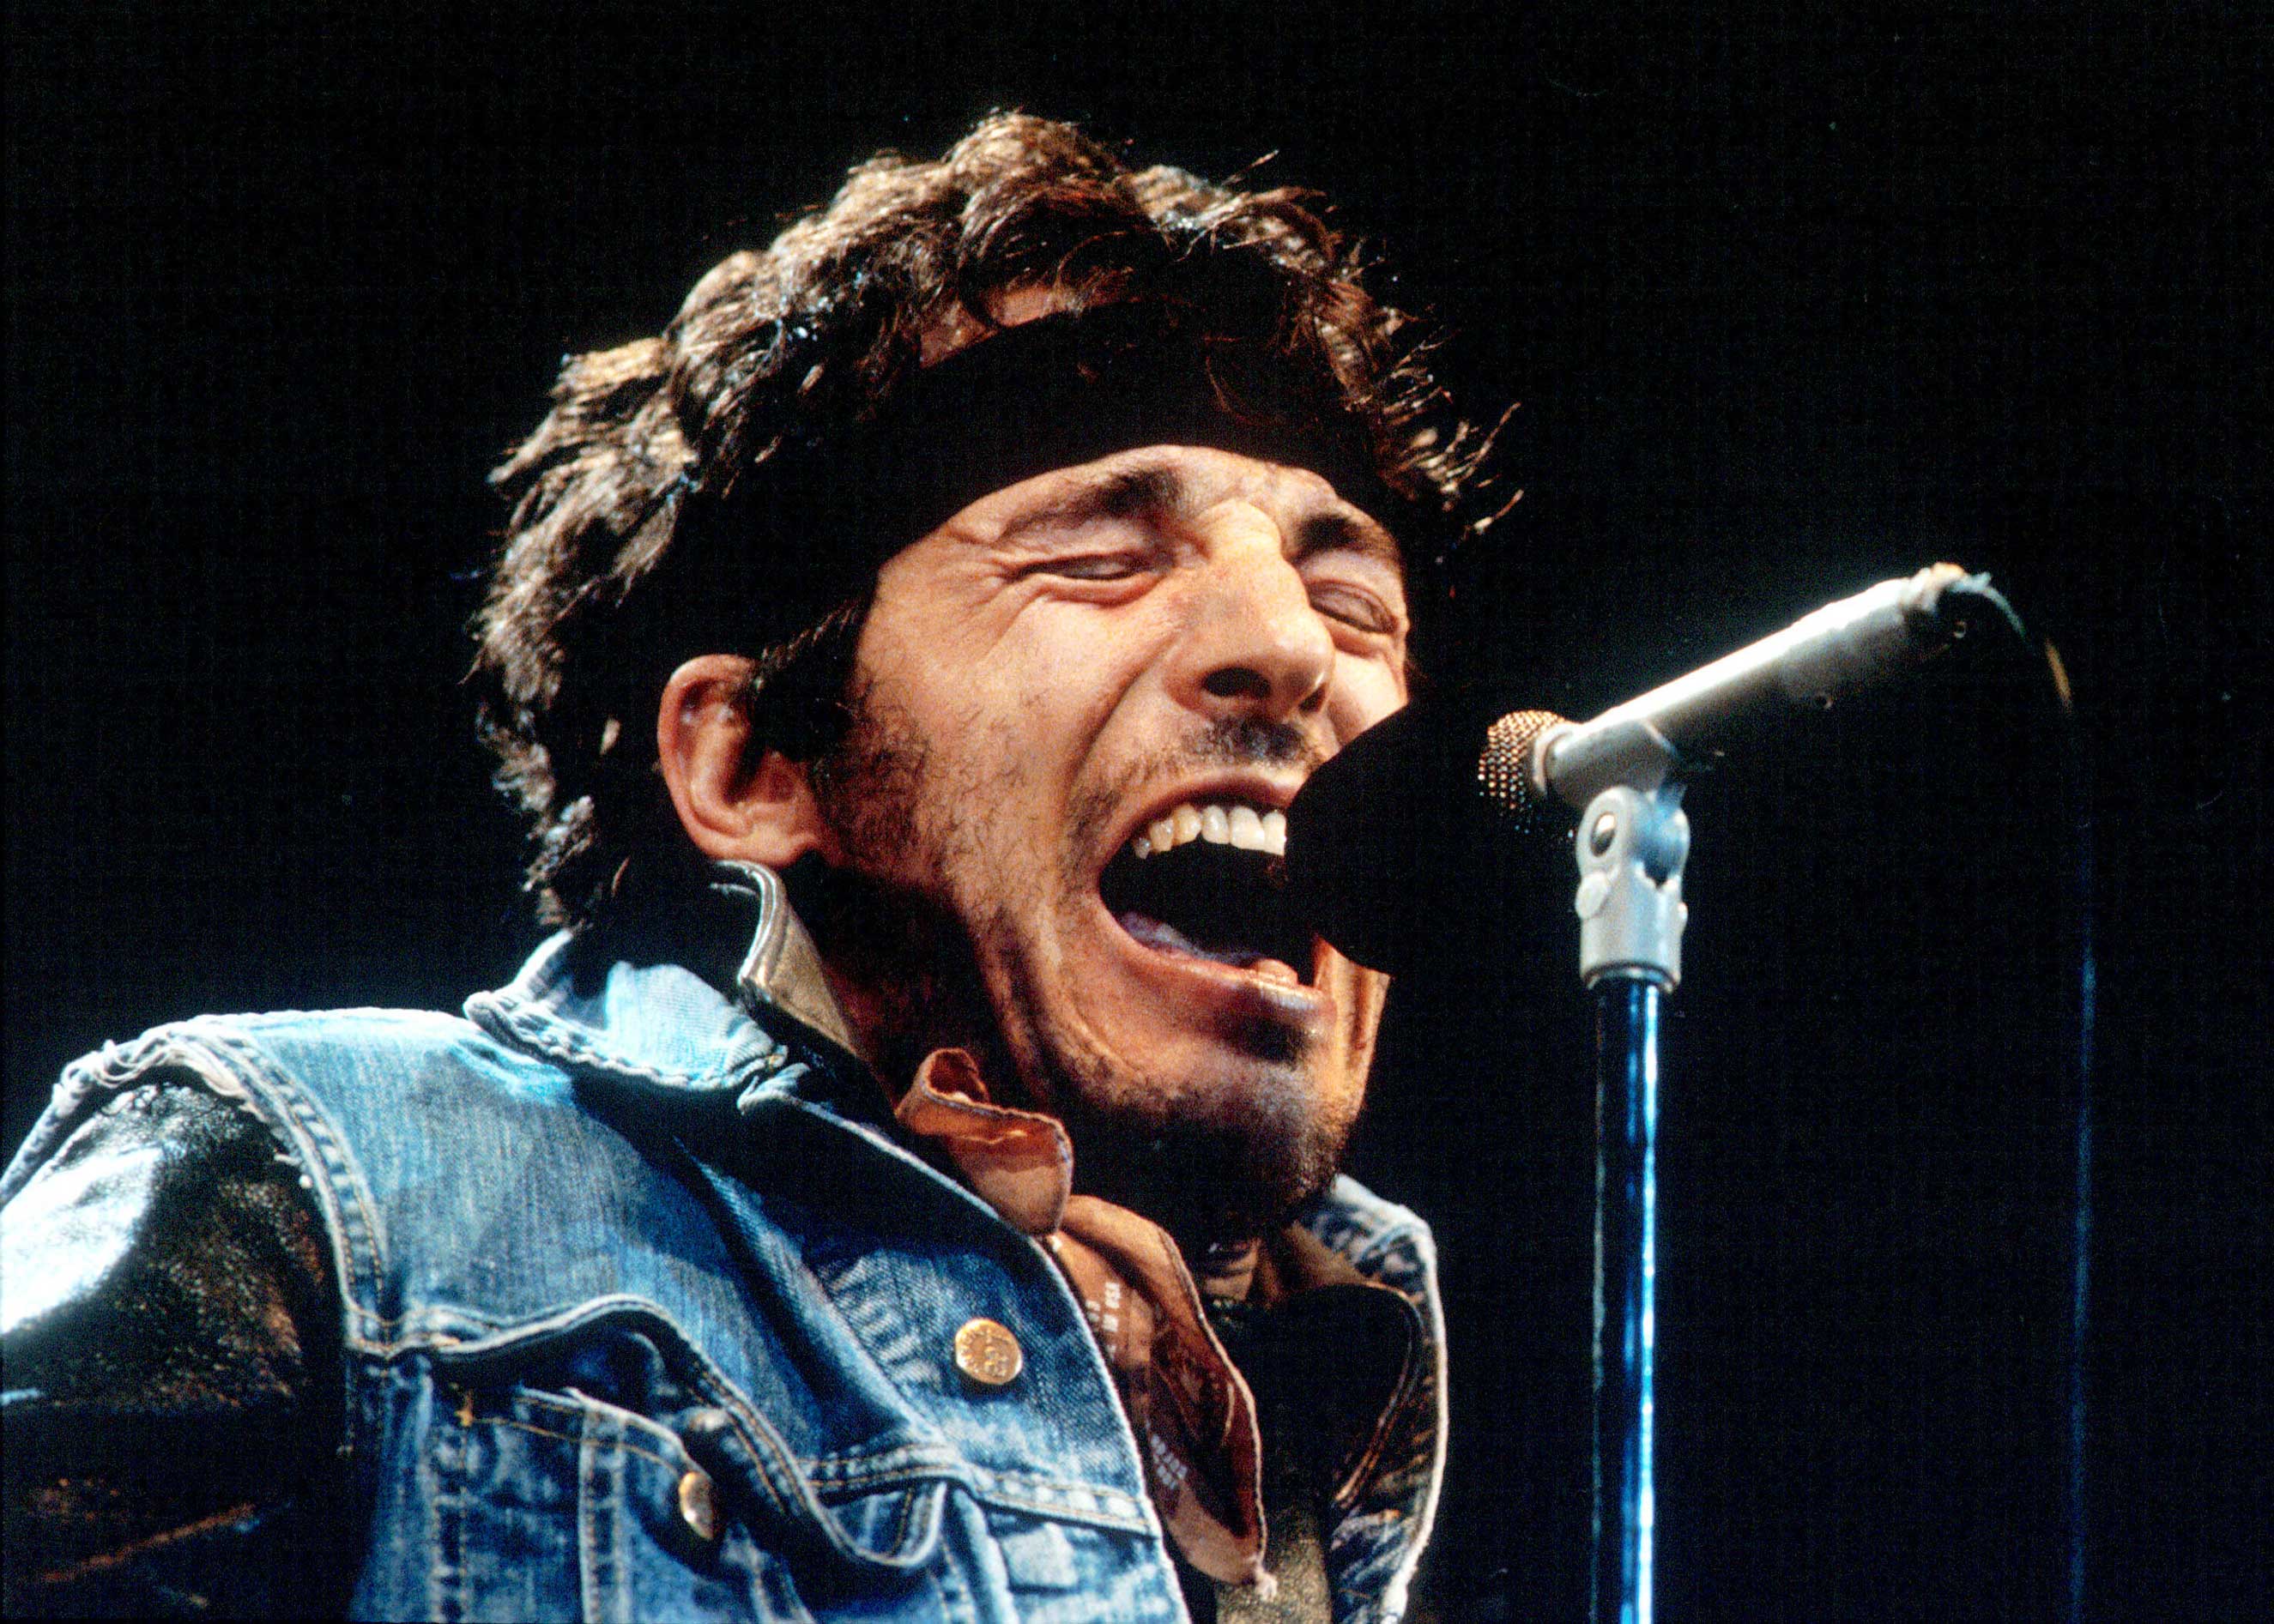 Bruce Springsteen performs during the last show of the 1985 ‘Born in the U.S.A. Tour’. in Los Angeles, California (Bob Riha Jr—Getty Images)